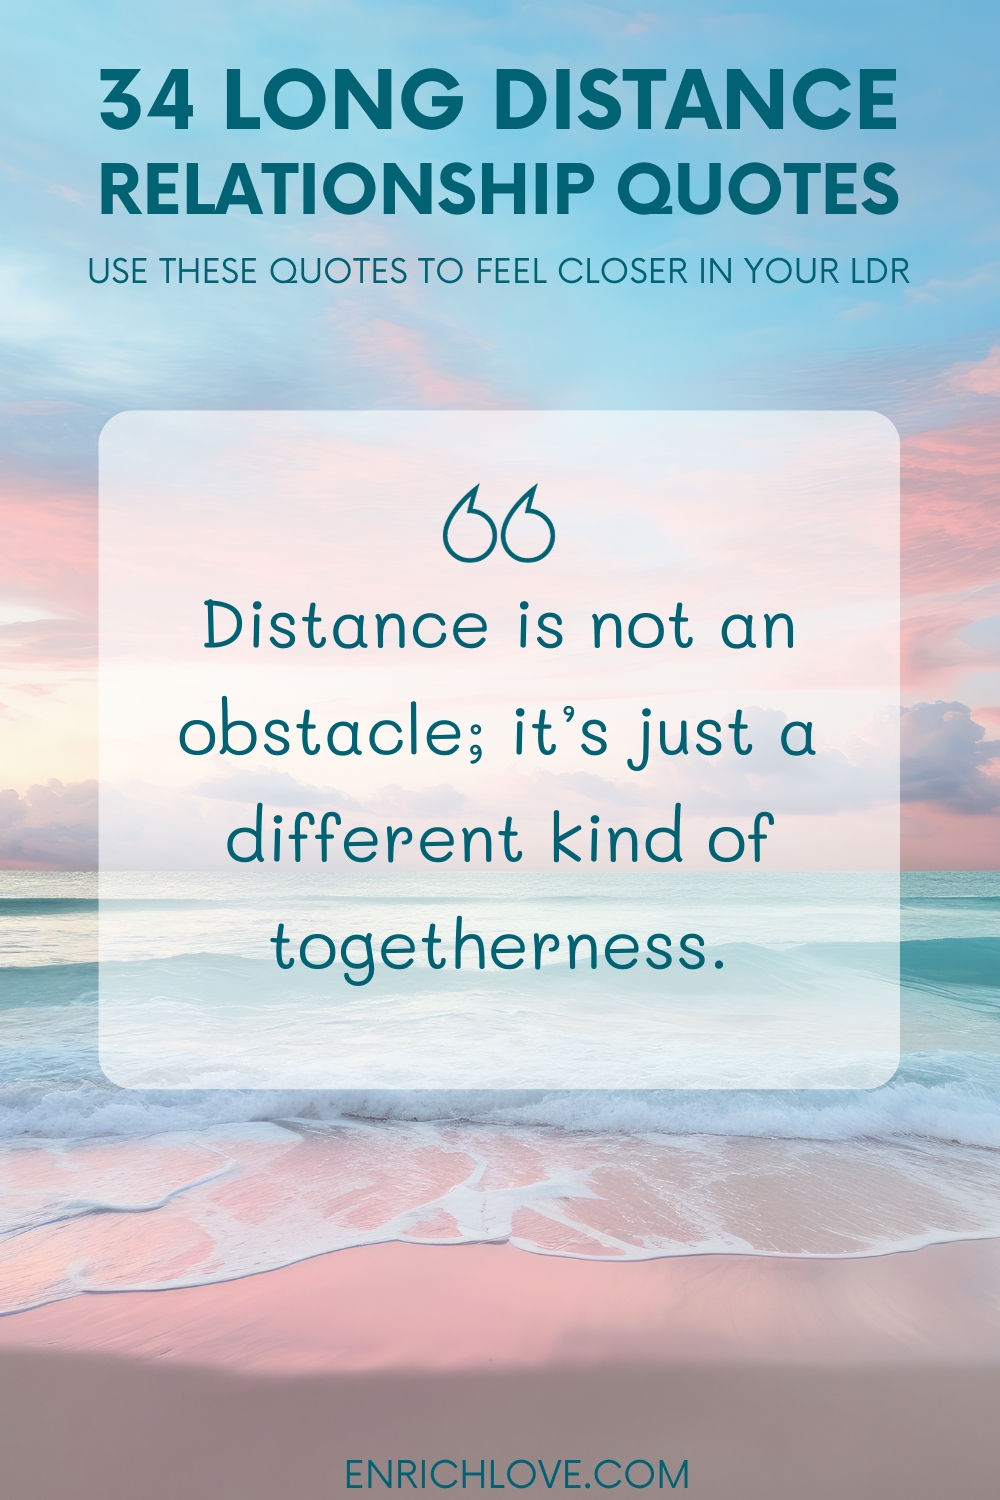 34 Long Distance Relationship Quotes - Distance is not an obstacle; it’s just a different kind of togetherness.